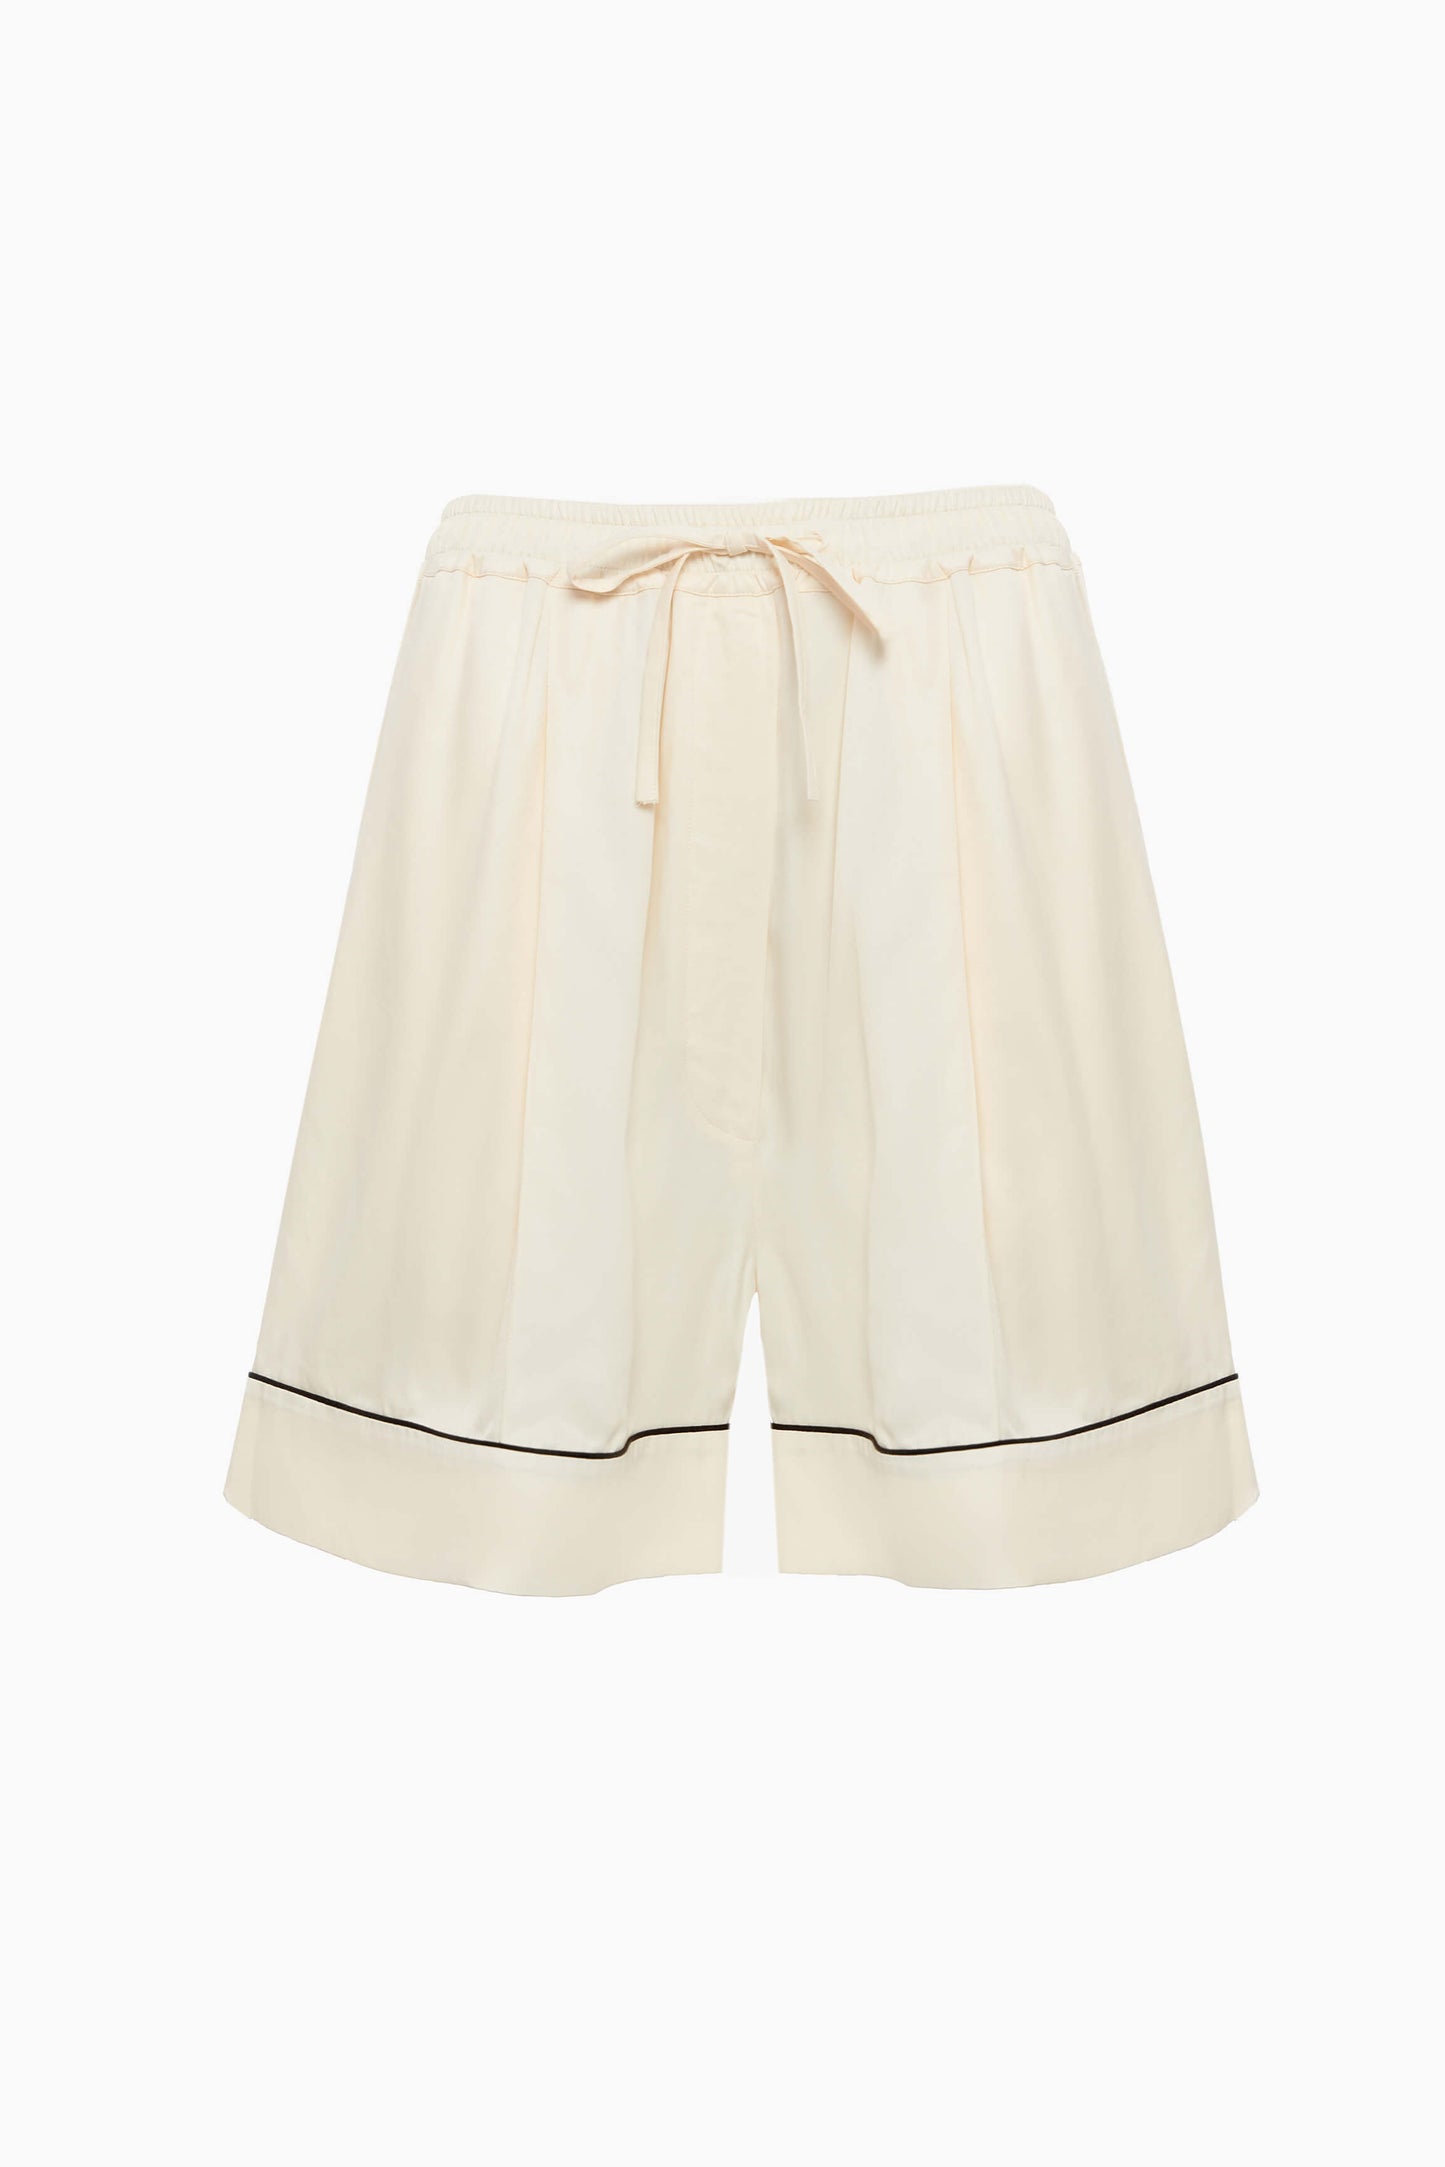 Pastelle Oversized Shorts in Off-white